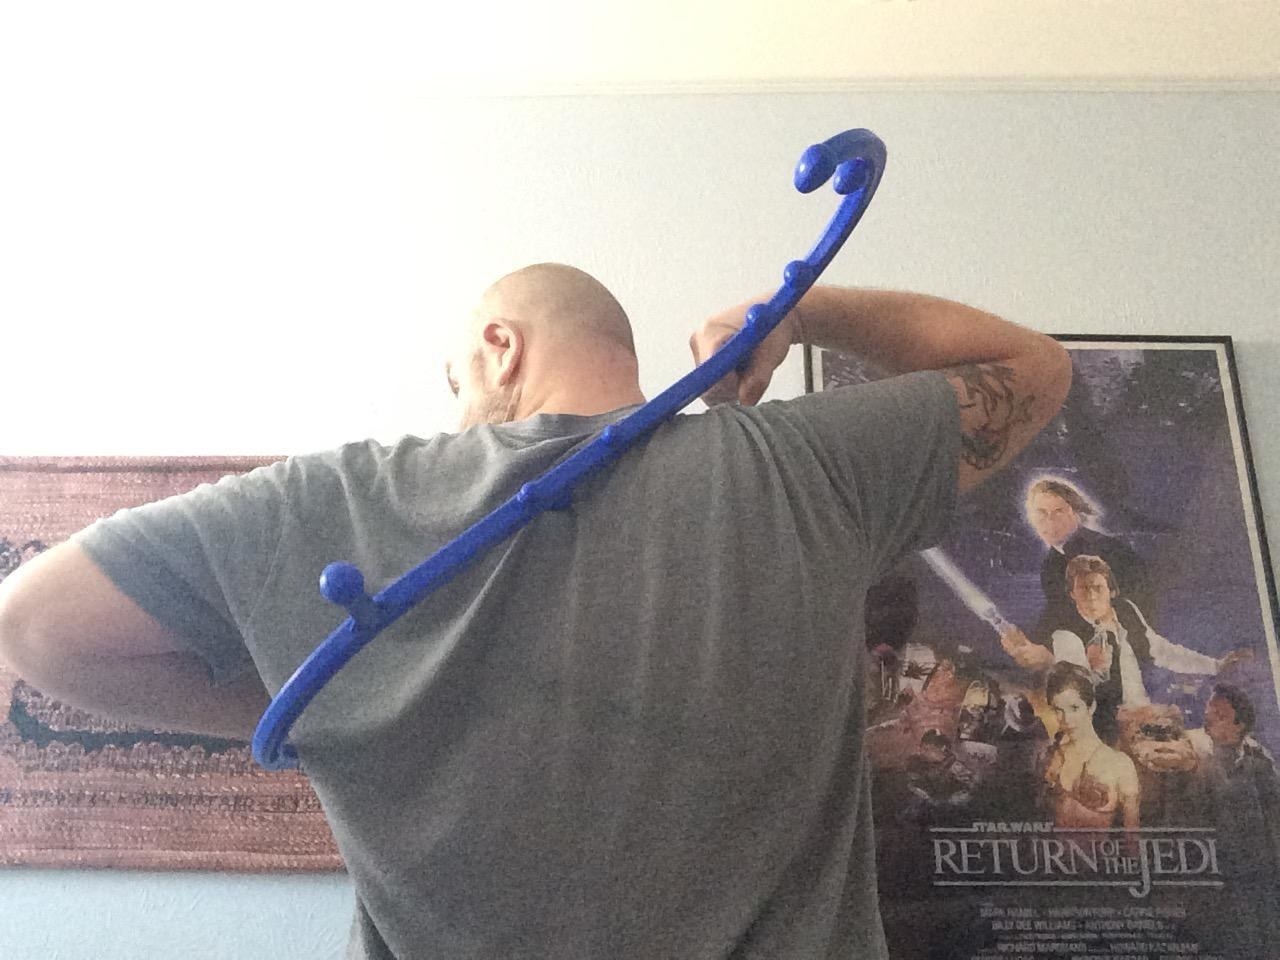 reviewer using the s-shaped stick across their back with little knobs all over it